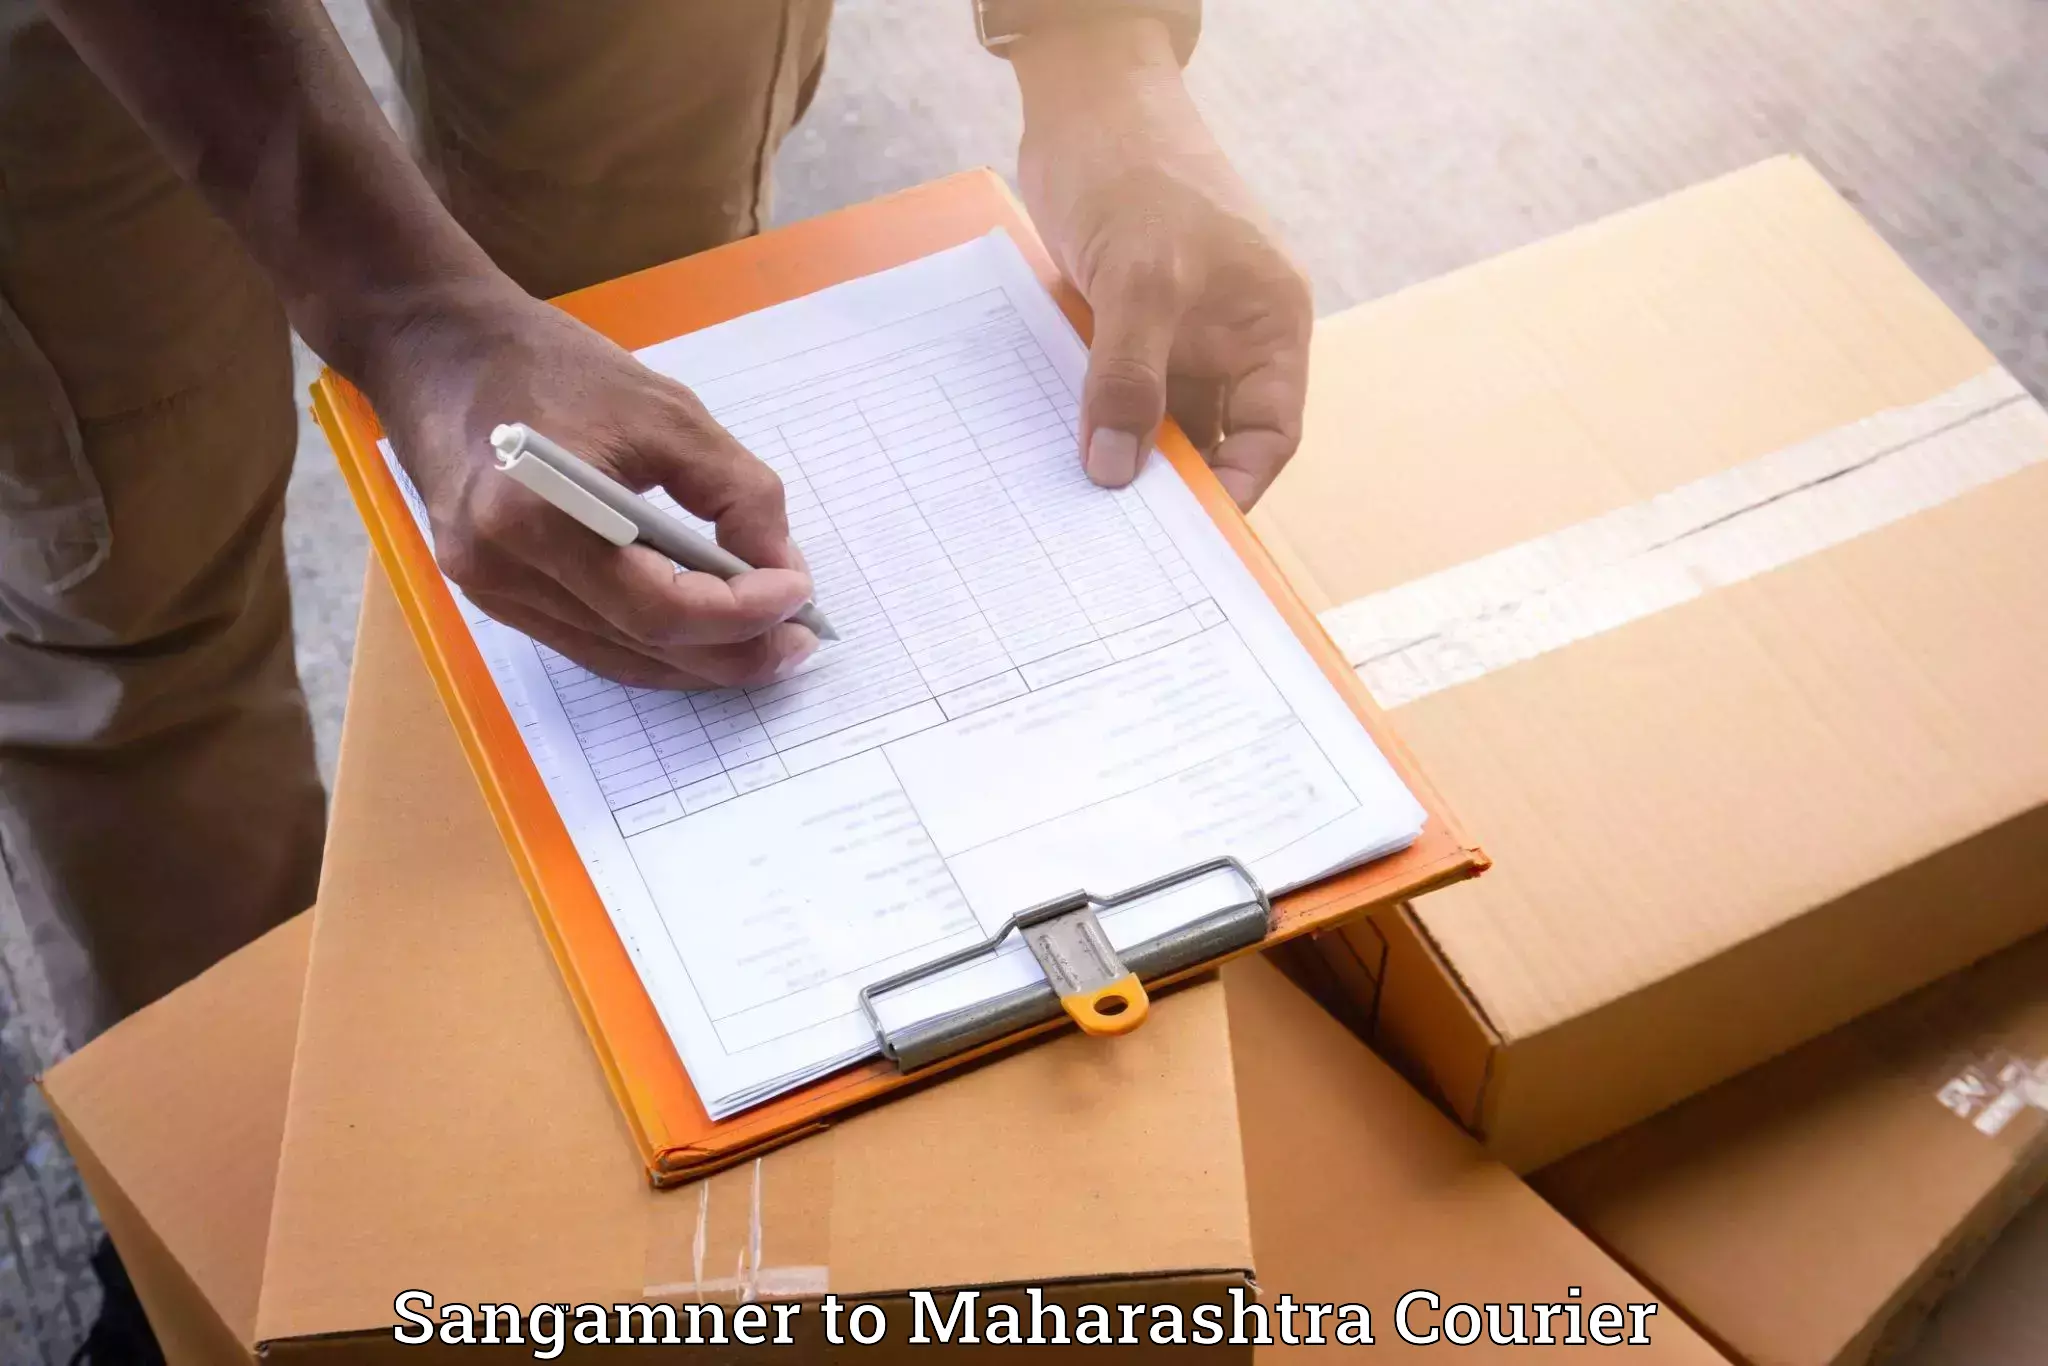 Furniture delivery service in Sangamner to Akkalkuva